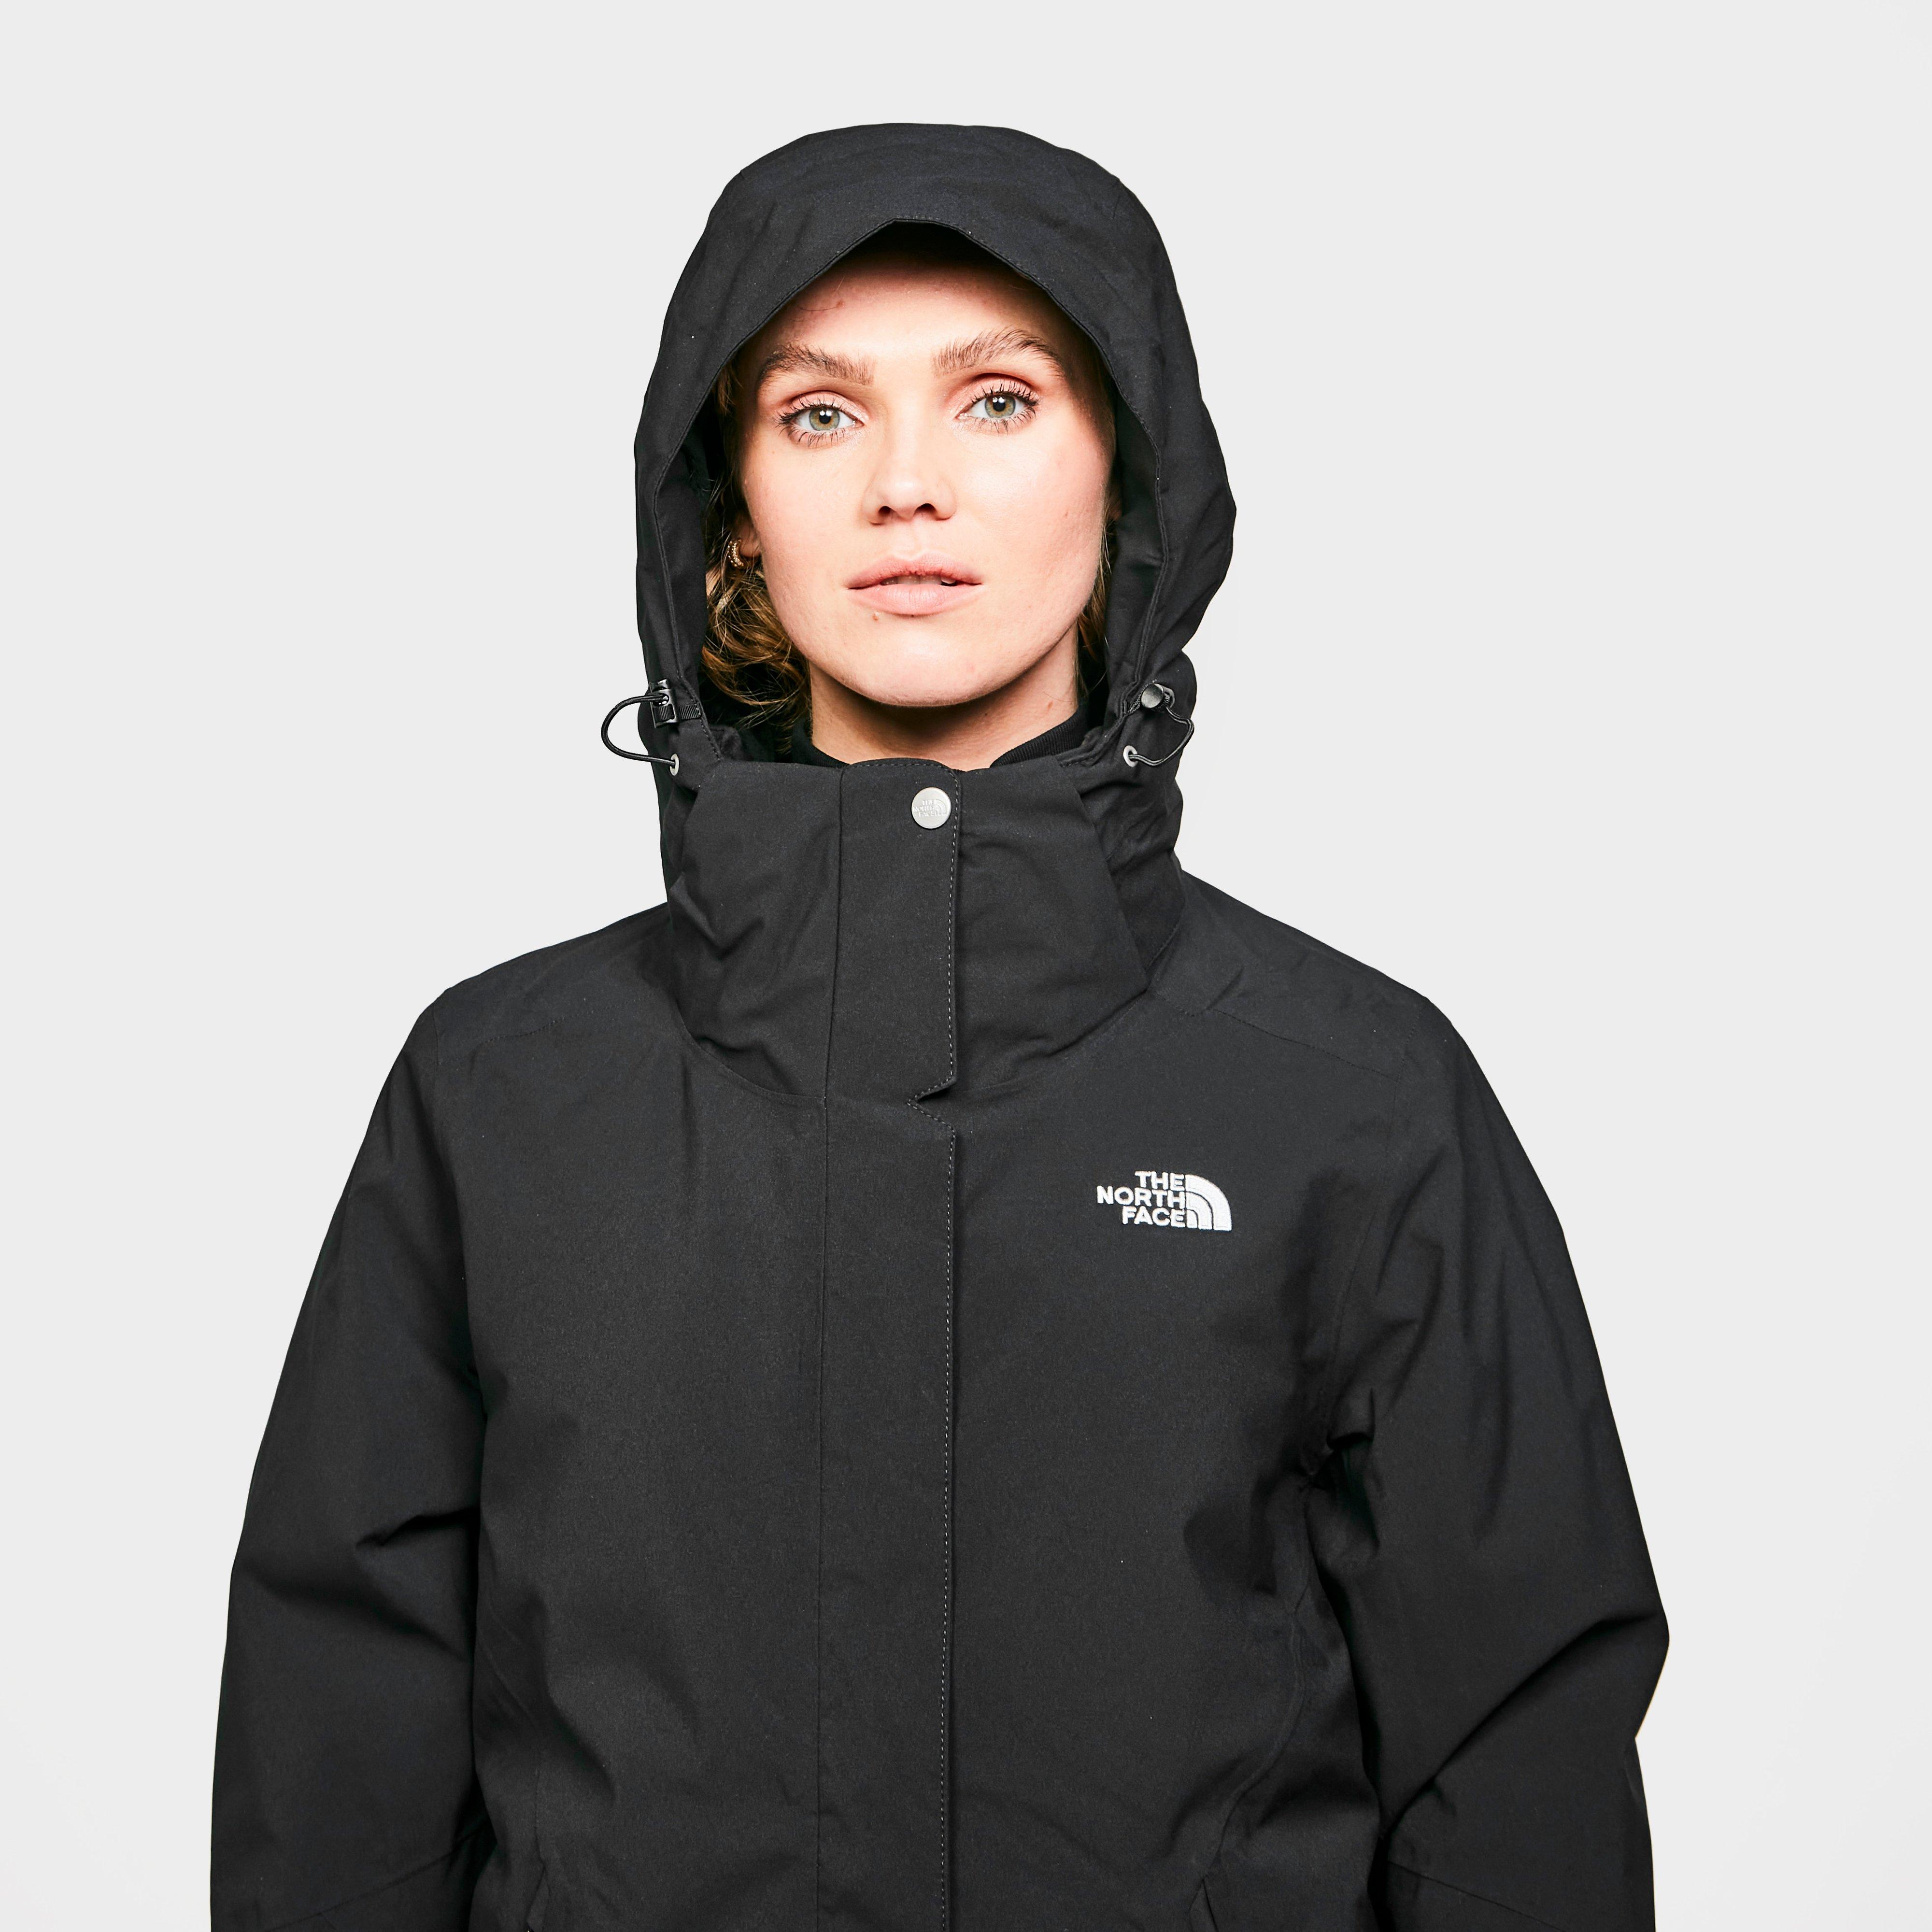 cotswold north face sale